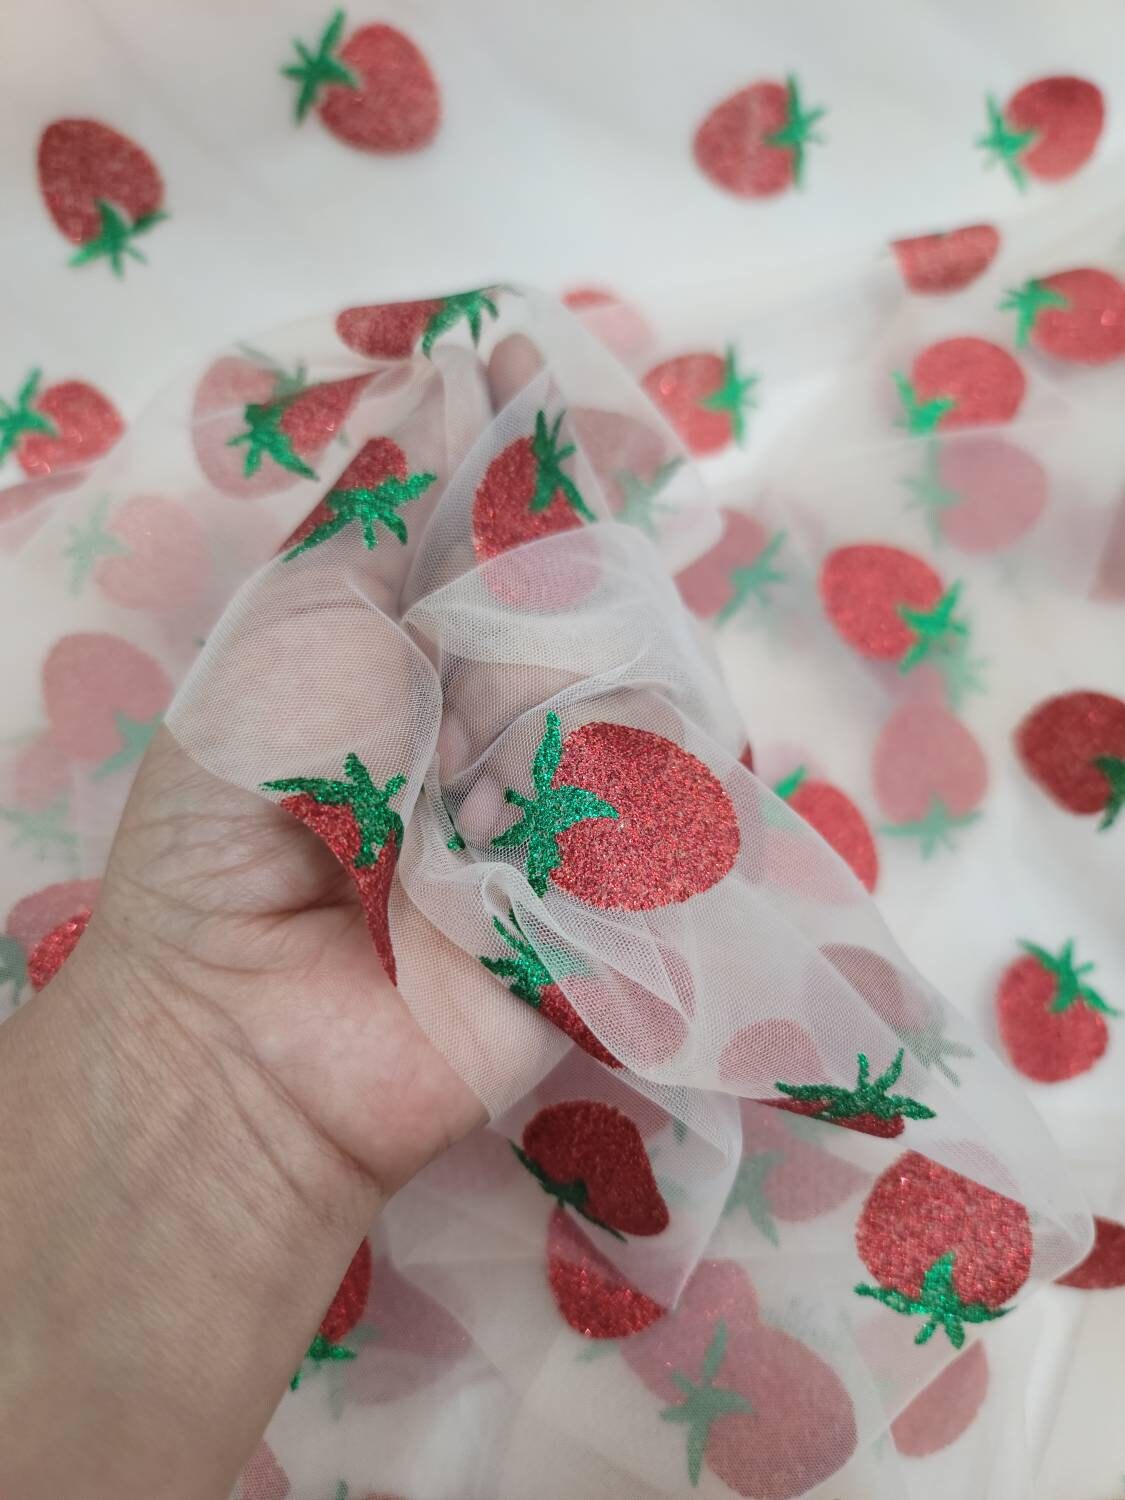 arricraft Strawberry Decorating Lace Trim Ribbons 7.5 Yard ×5/8 Fruit  Style Polyester DIY Ribbon for Sewing Craft Decoration